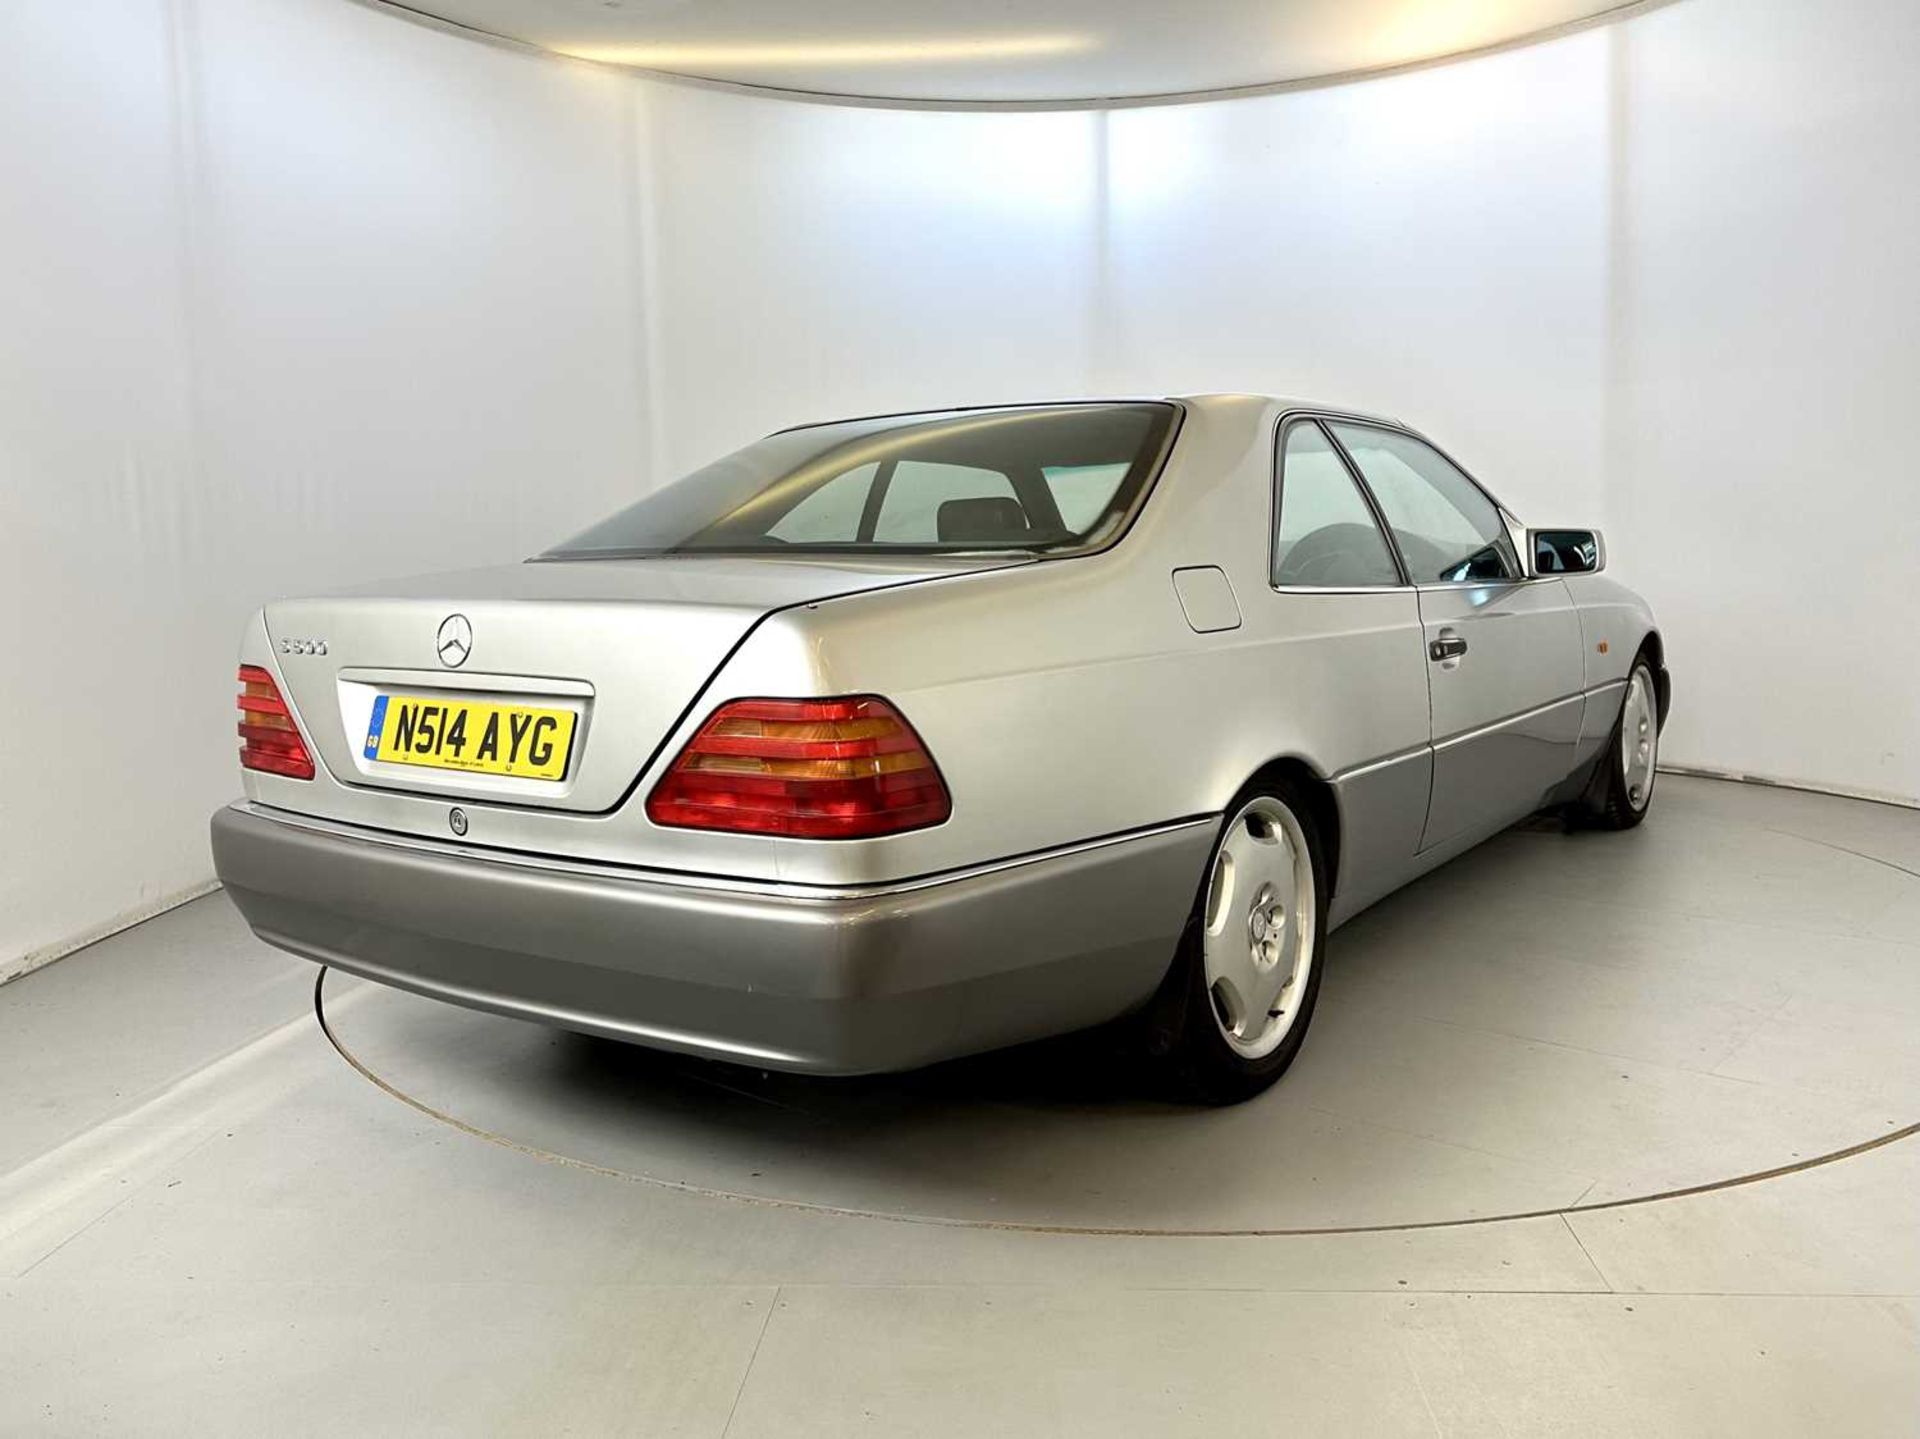 1995 Mercedes-Benz S500 Coupe - Image 9 of 30